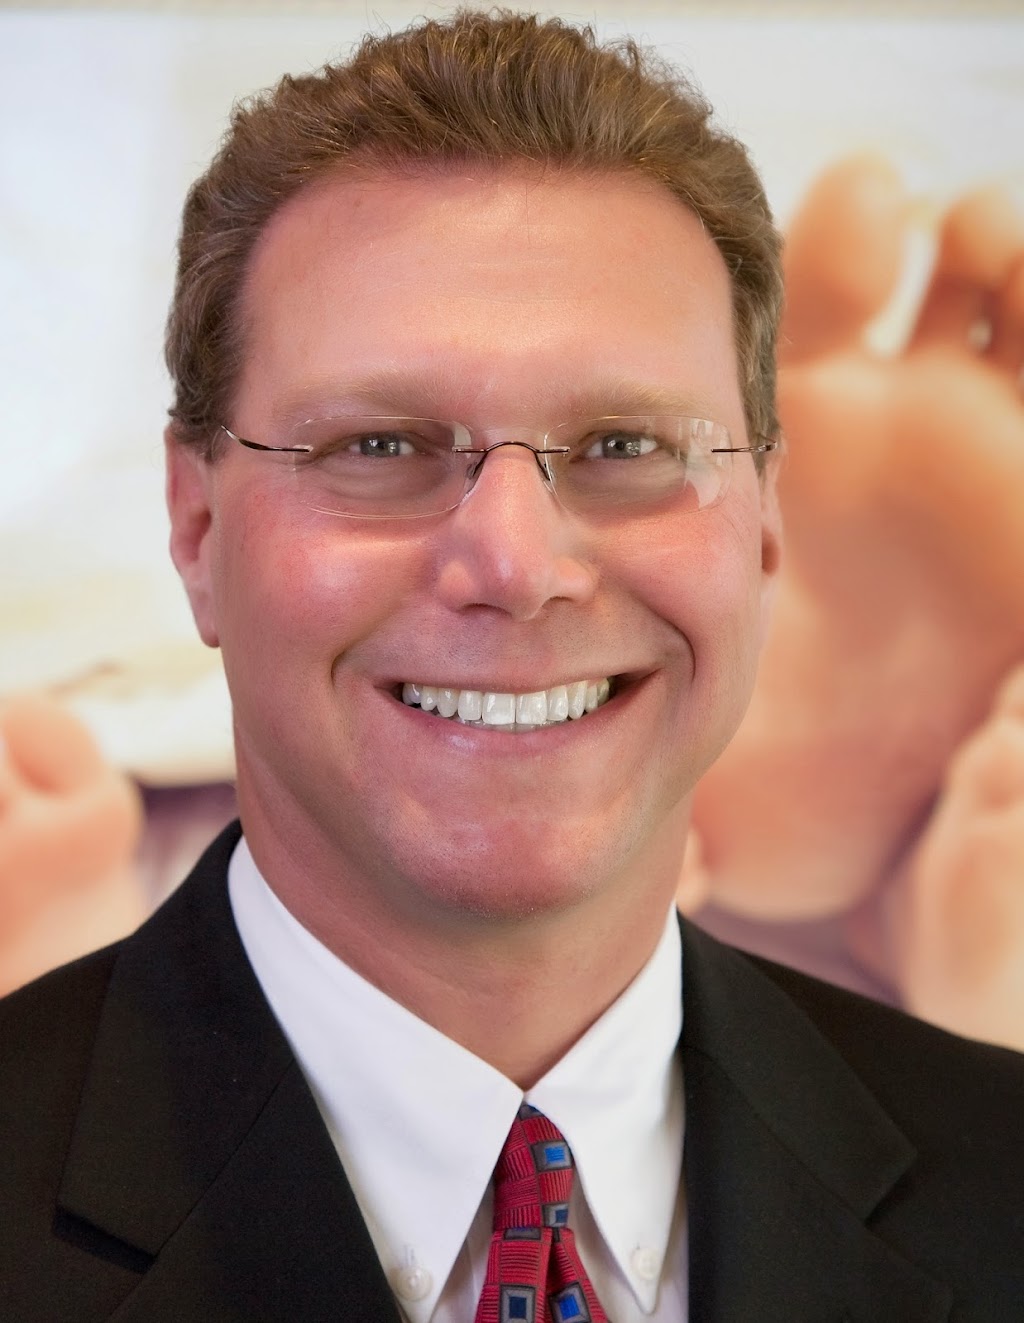 Dr. Eric Ricefield | 1410 Russell Rd # 201, Paoli, PA 19301 | Phone: (610) 644-6501